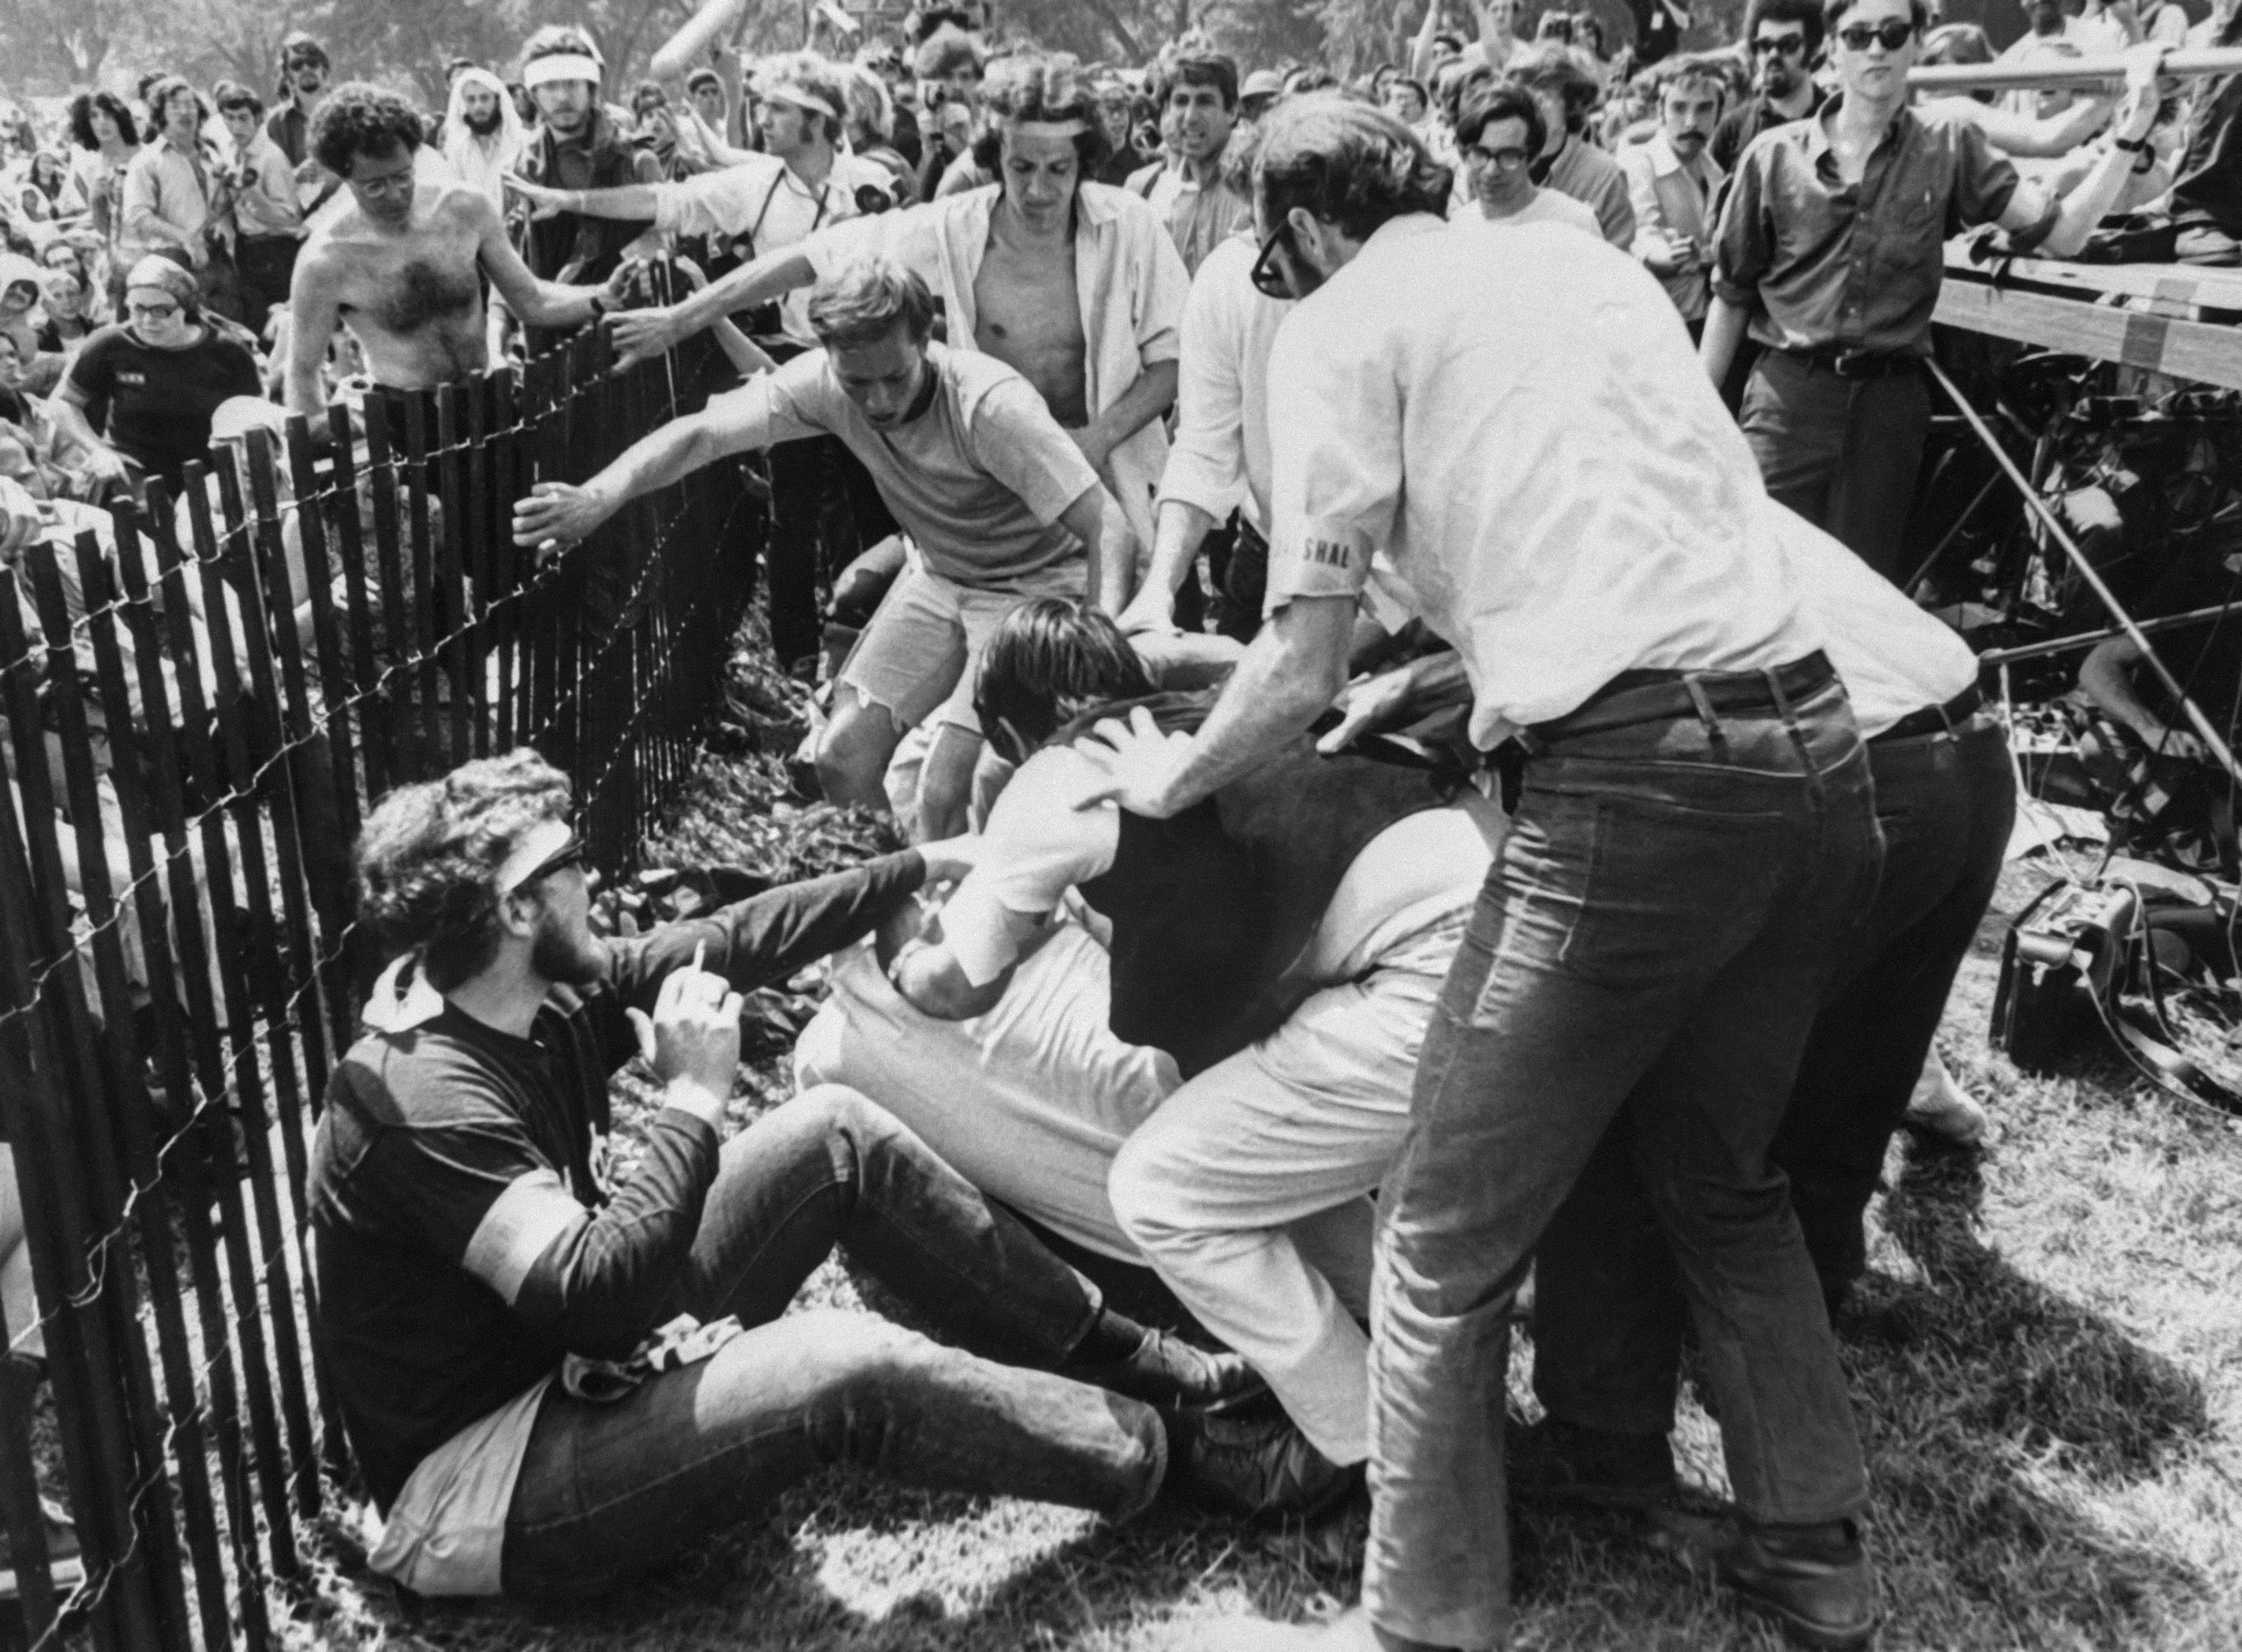 I was a student during Vietnam. Today's protests are different. | Opinion